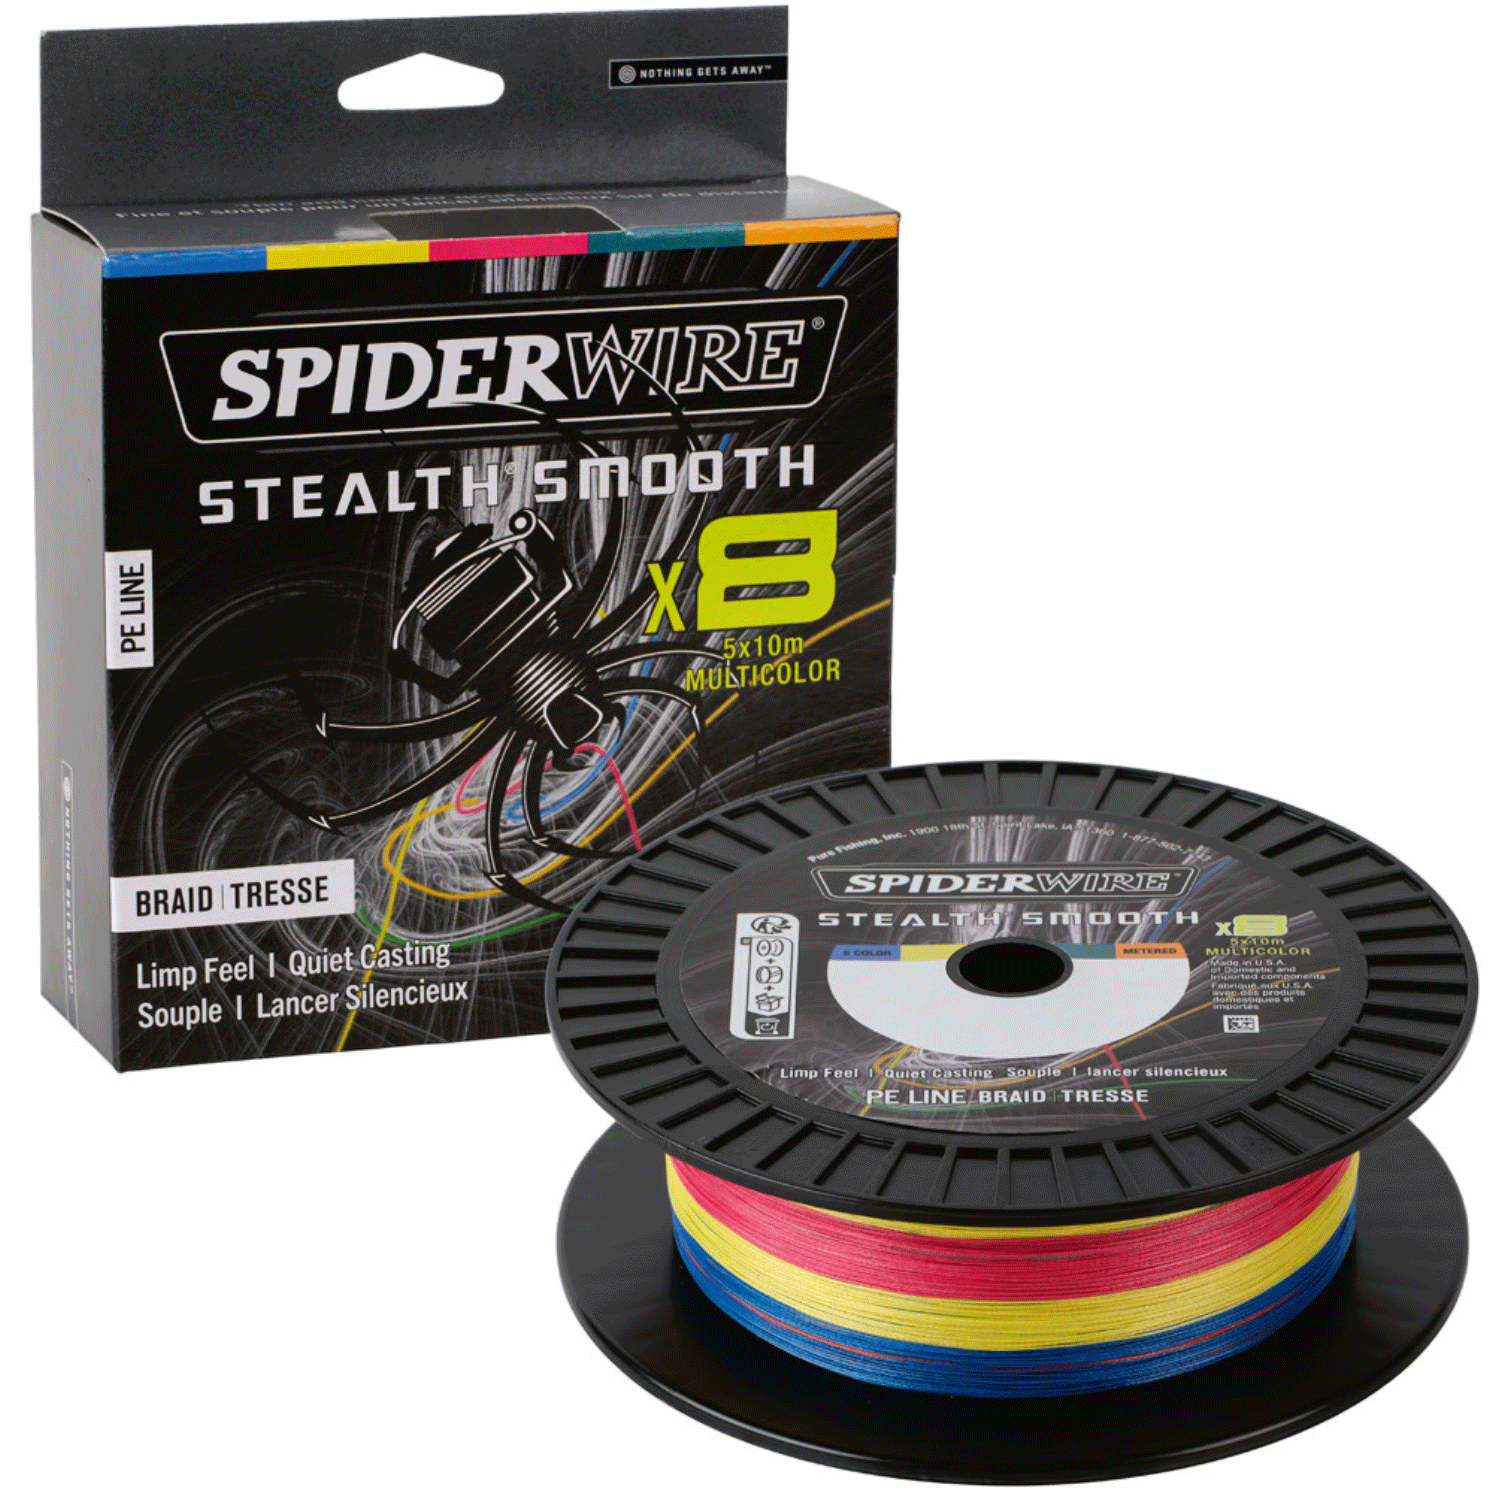 SpiderWire Stealth Smooth8 Braid - Multicolour – Glasgow Angling